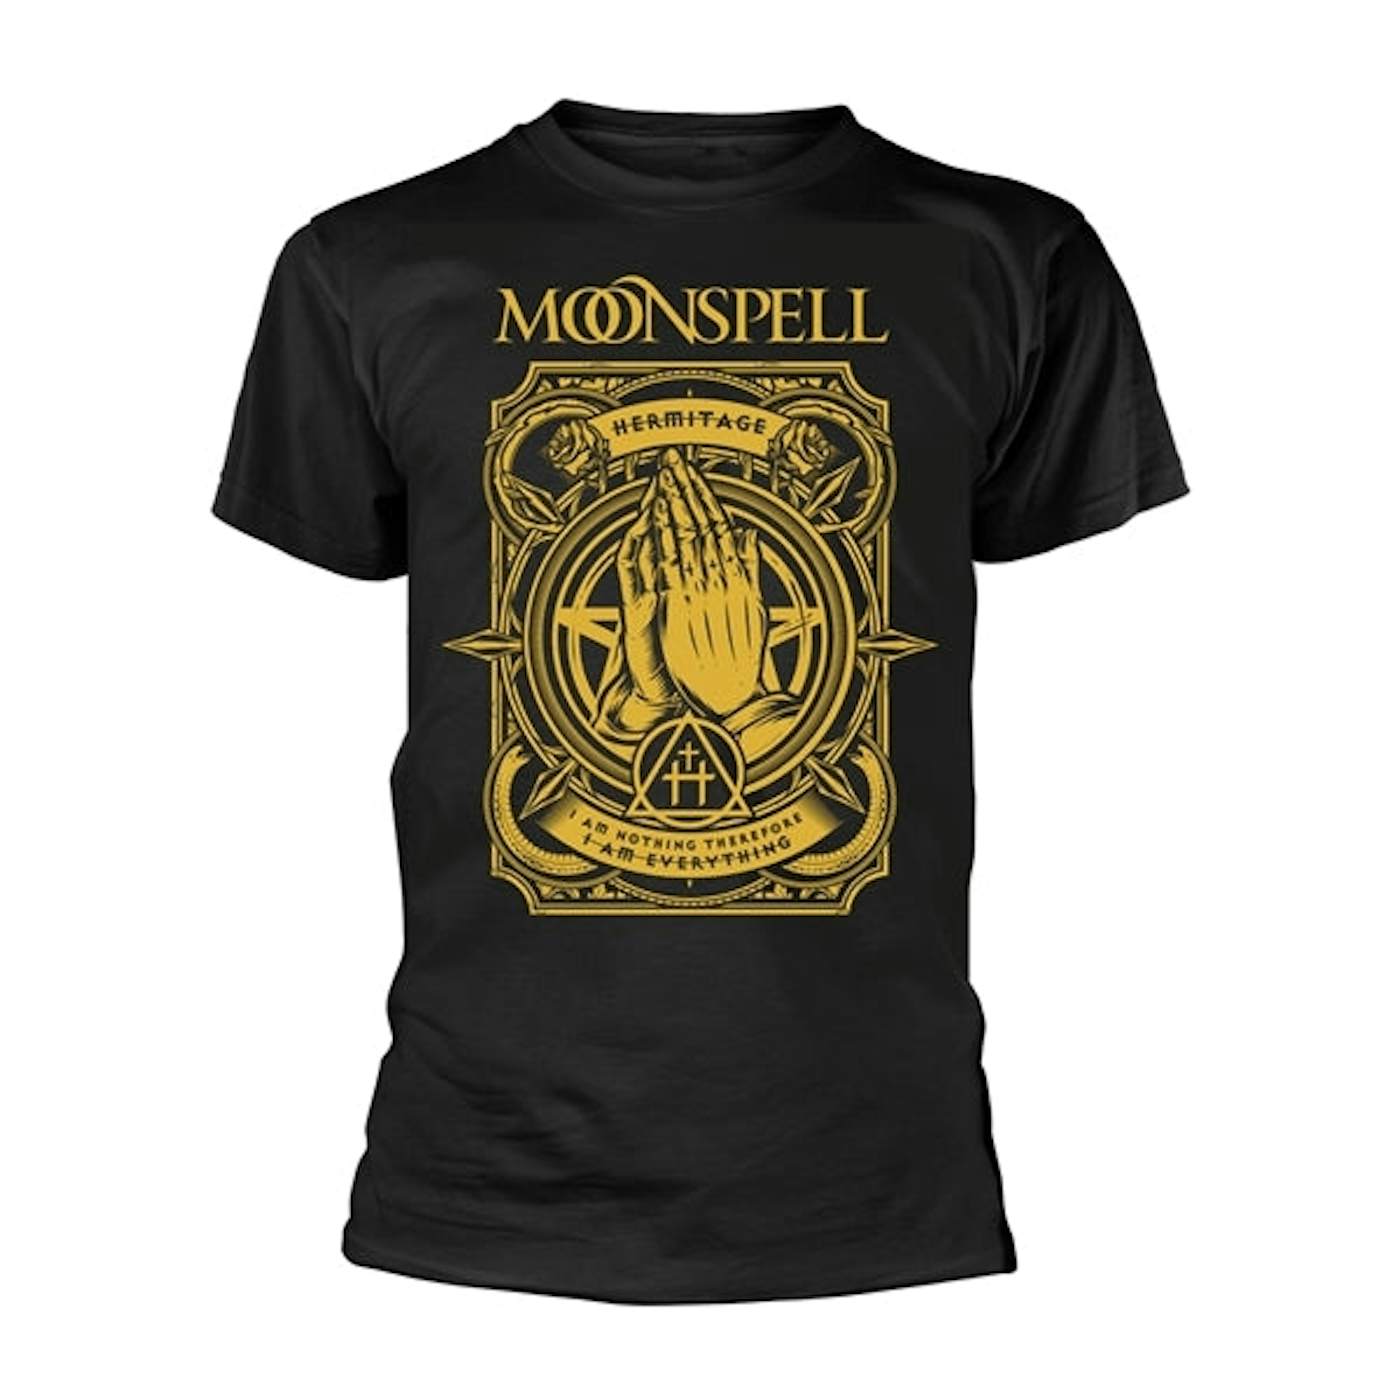 Moonspell T Shirt - I Am Everything